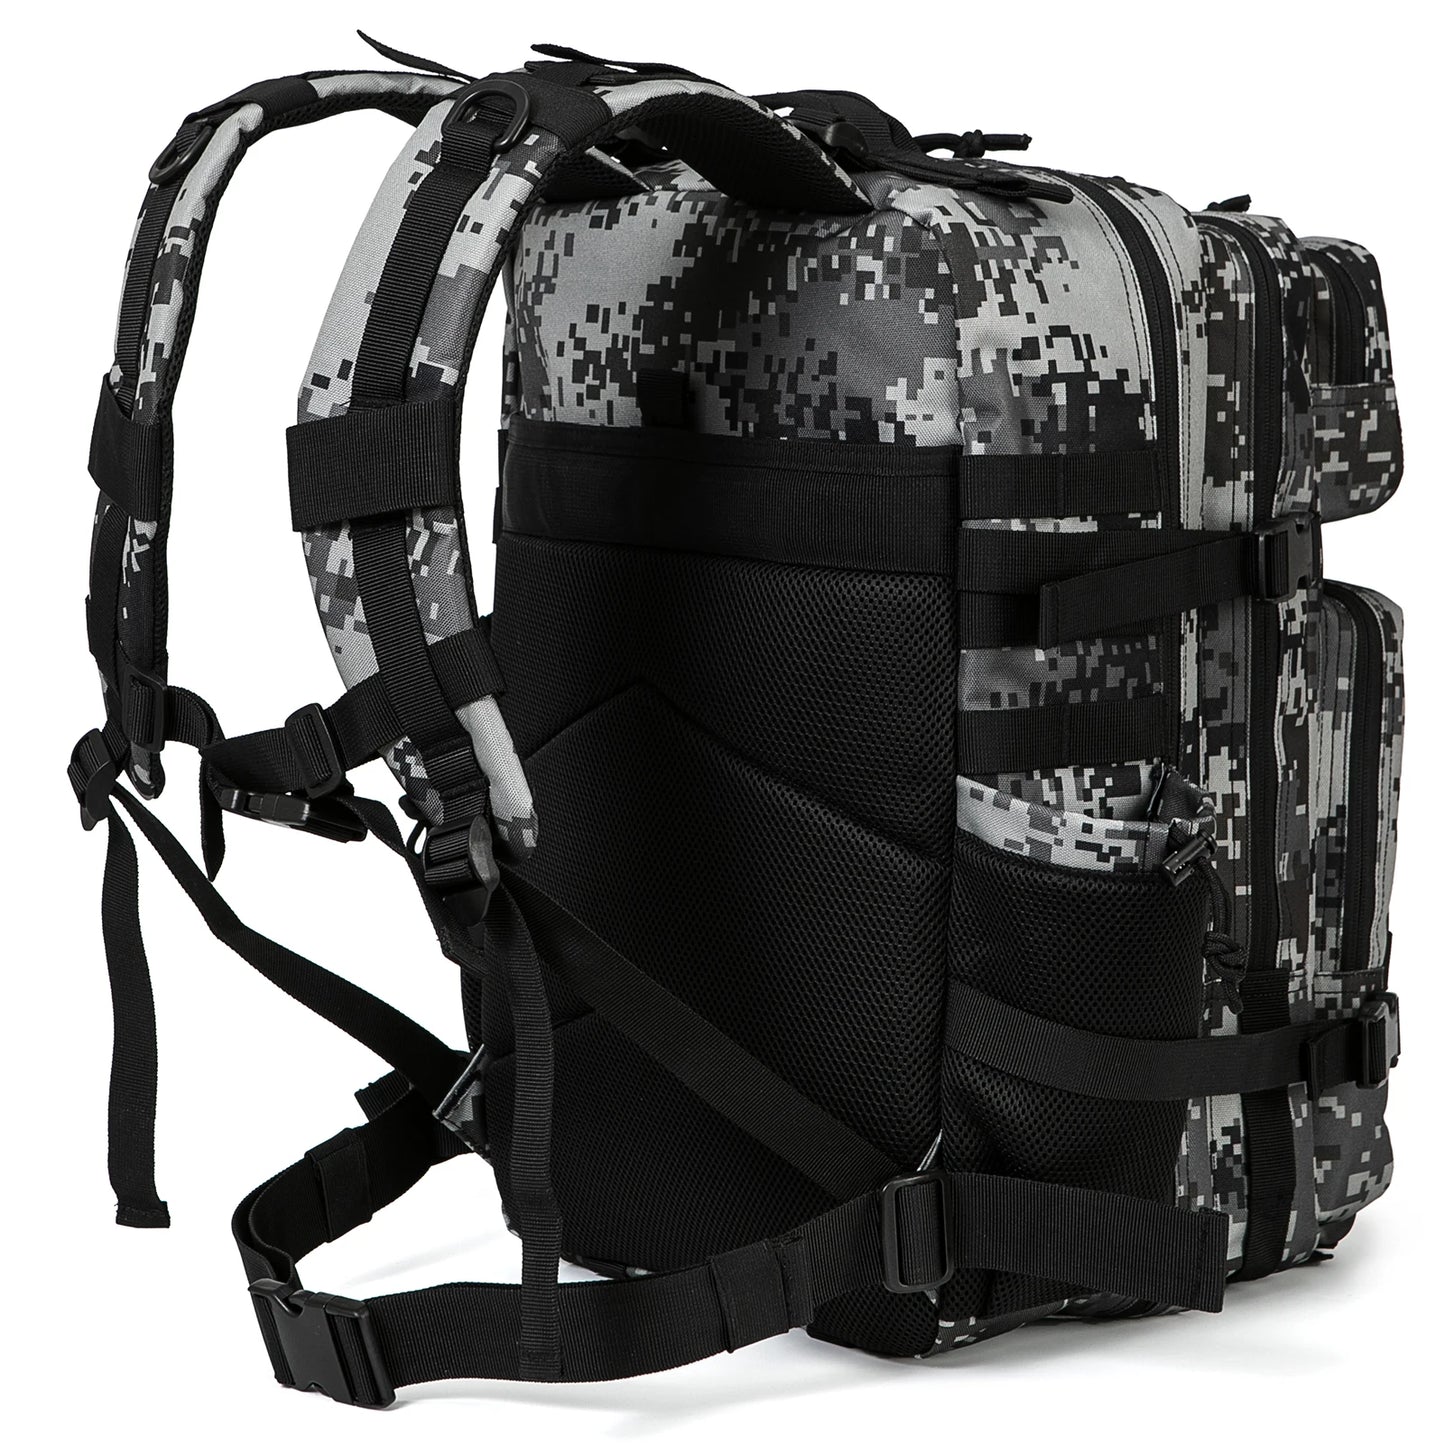 Wild West 50L Tactical and Outdoor Backpack with MOLLE System and Water Bottle Holder